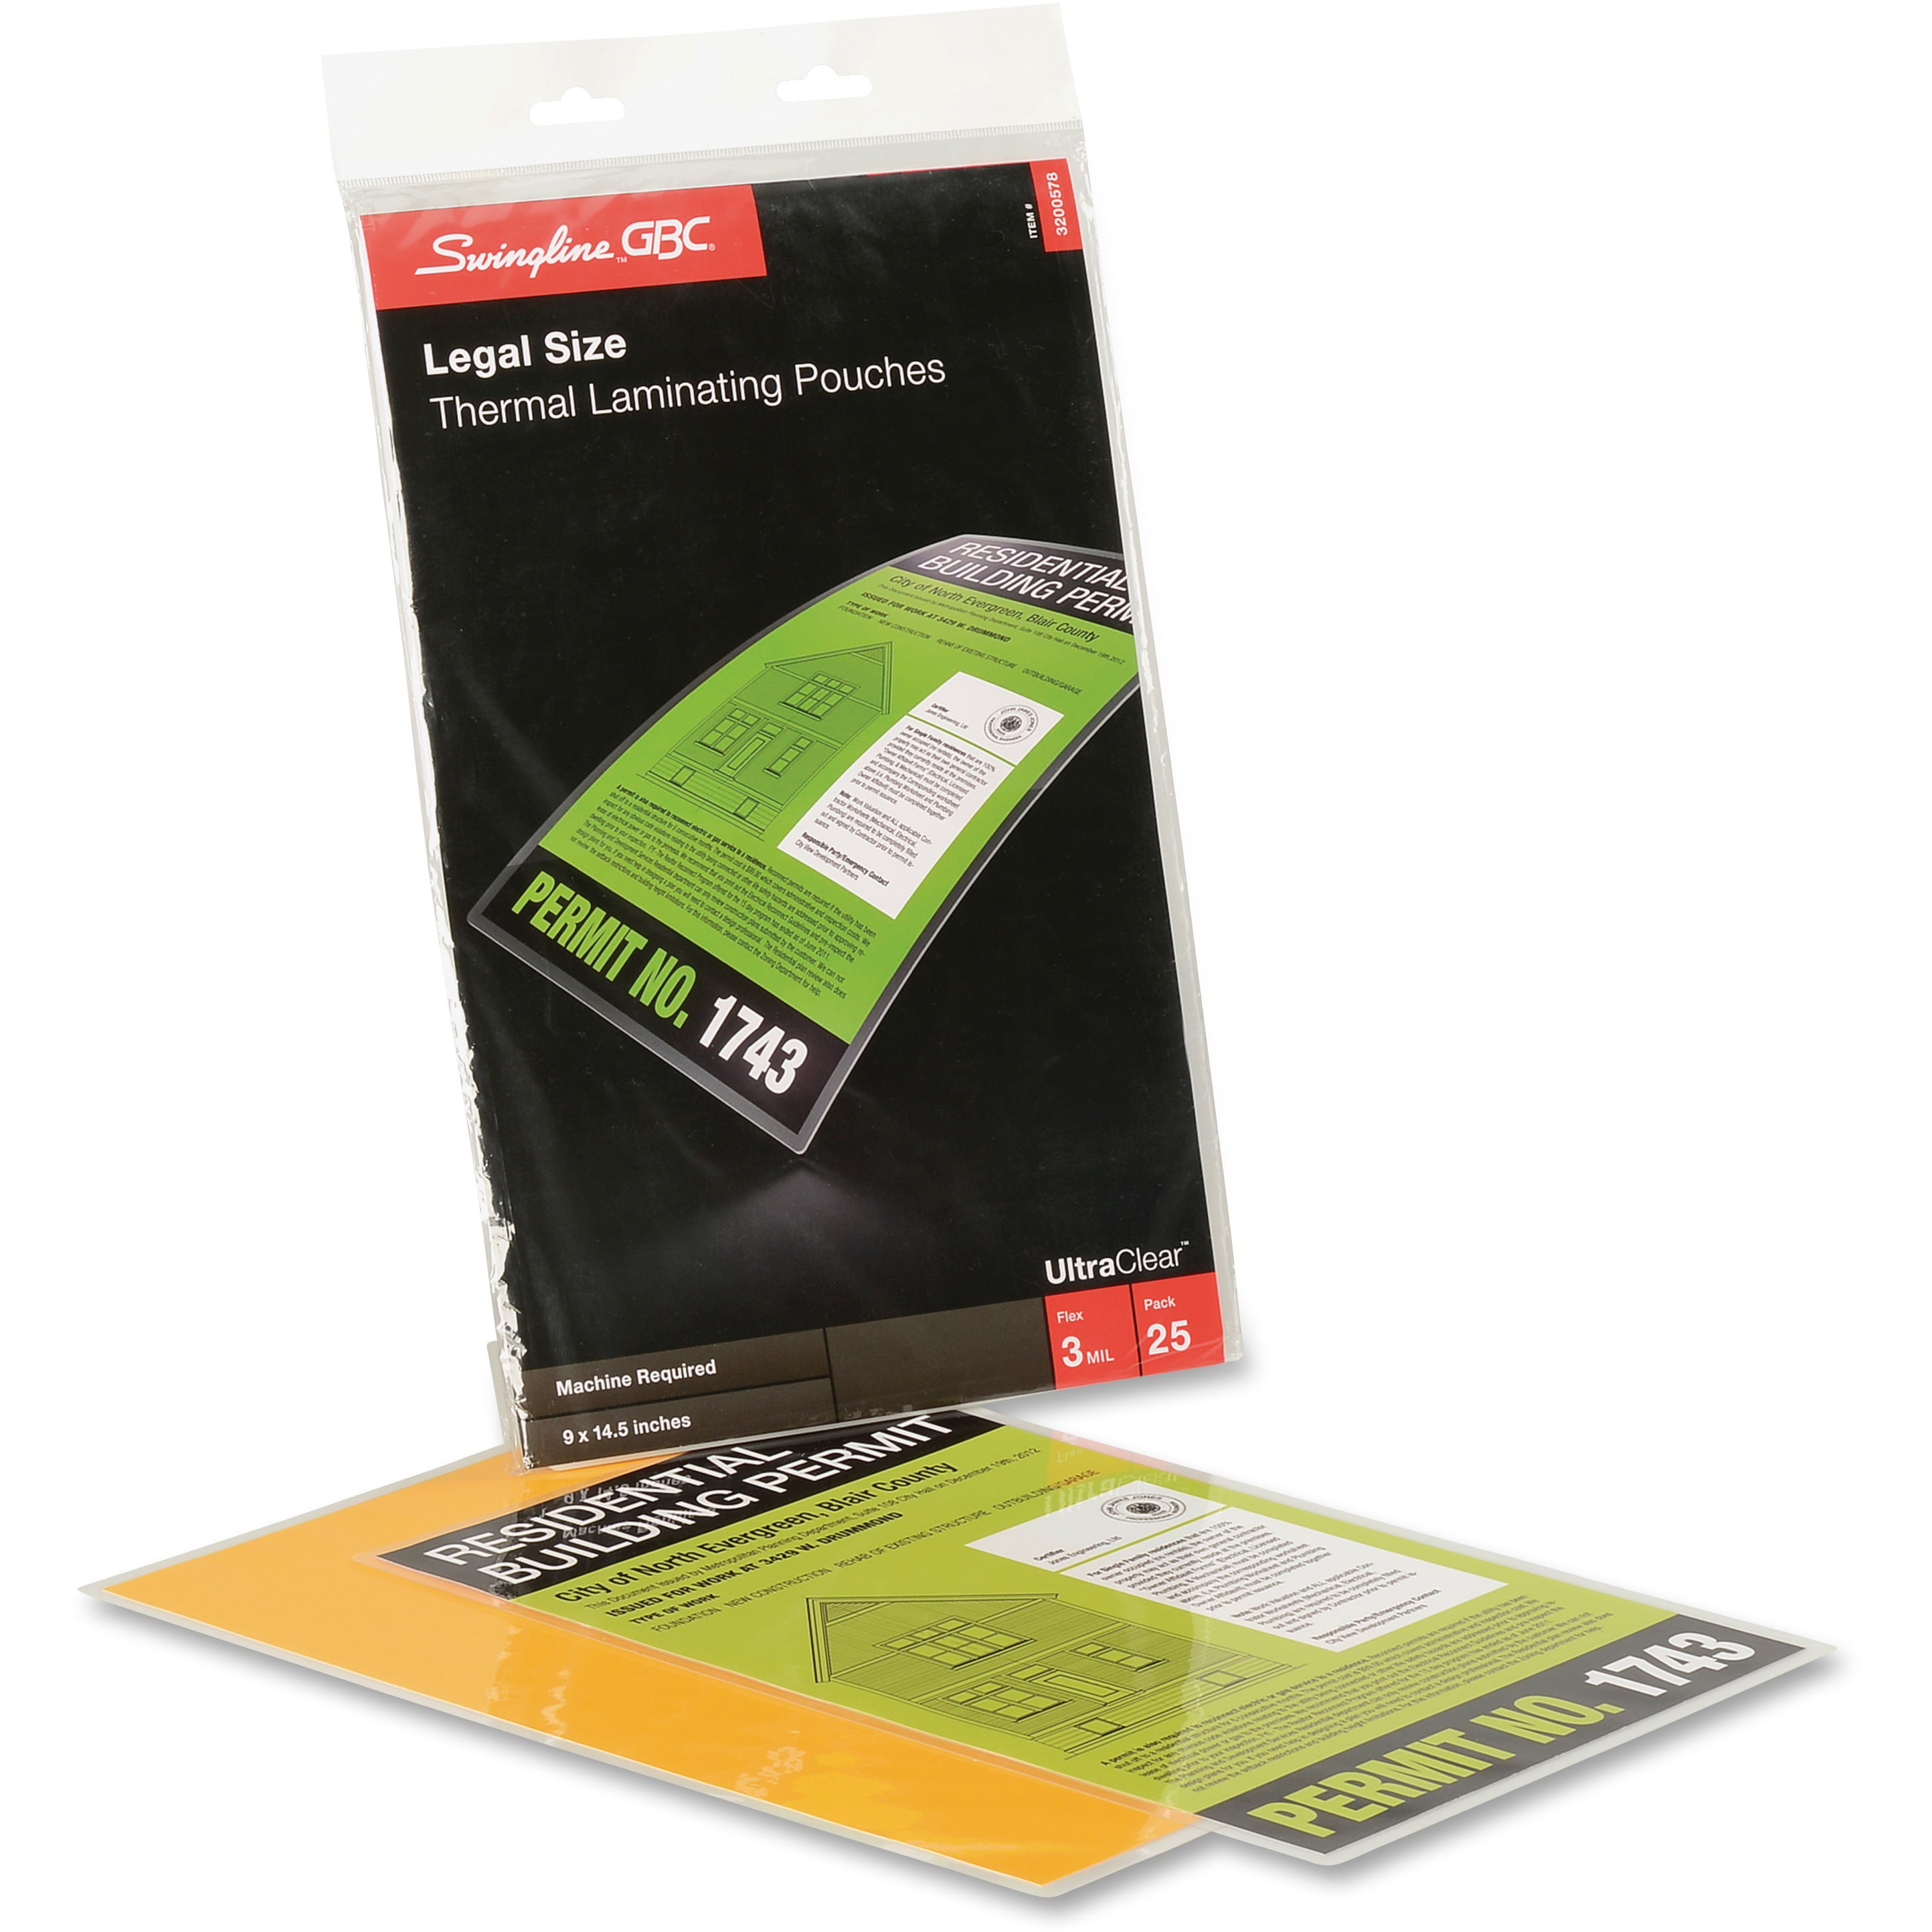 Pouches Lam Best Laminating 5 Mil Clear Legal Size Therm 9 X 14.5-100 pk. 